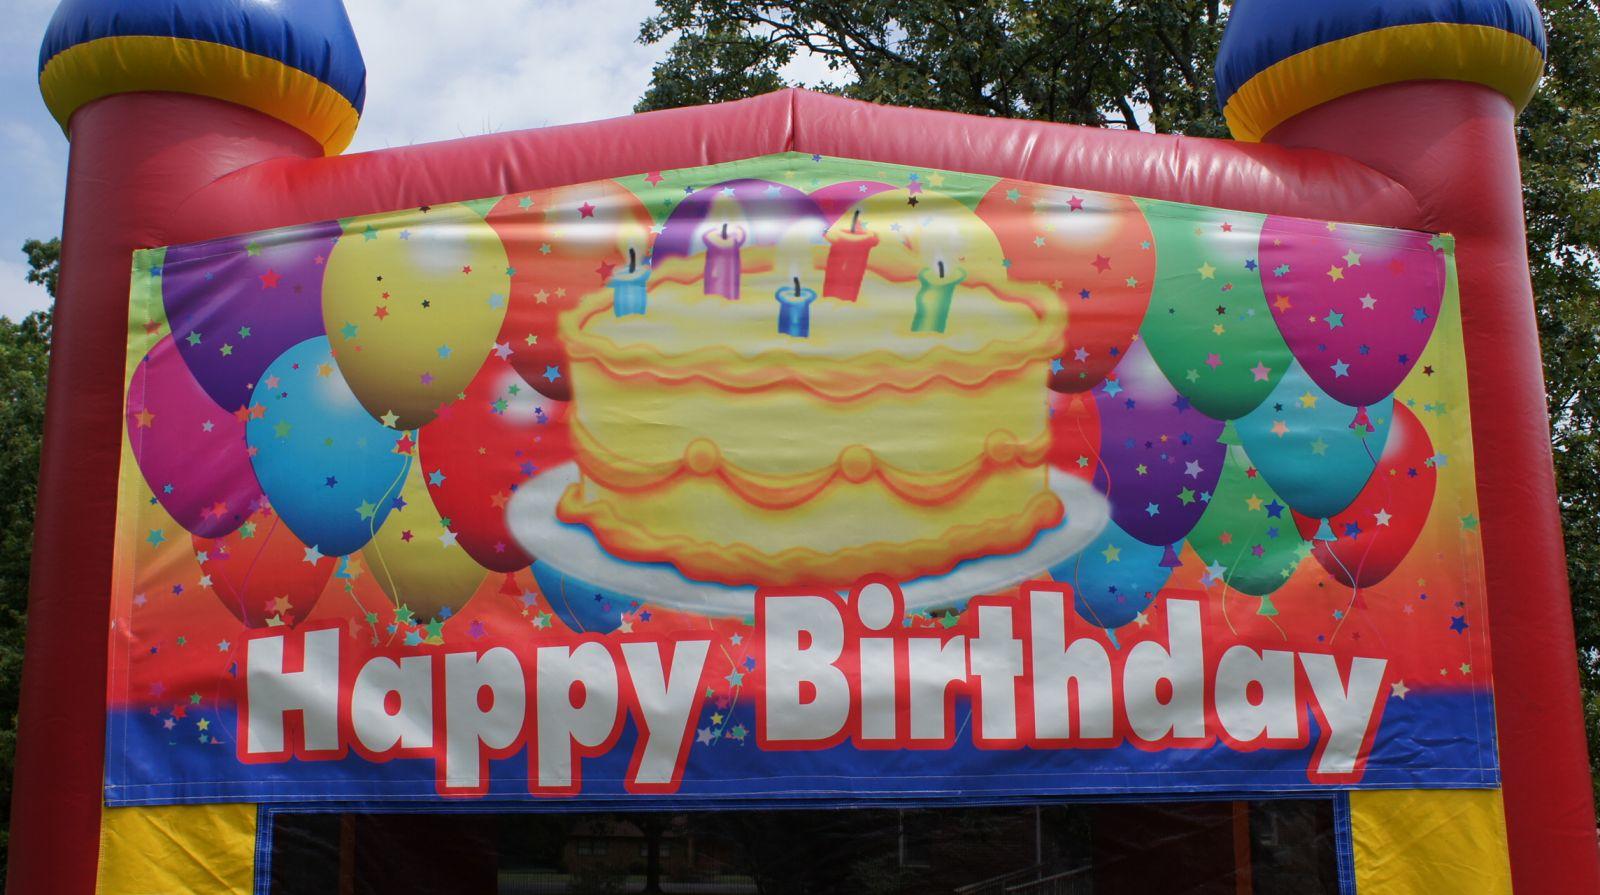 Happy Birthday Bounce House for rent Nashville TN Jumping Hearts Party Rentals